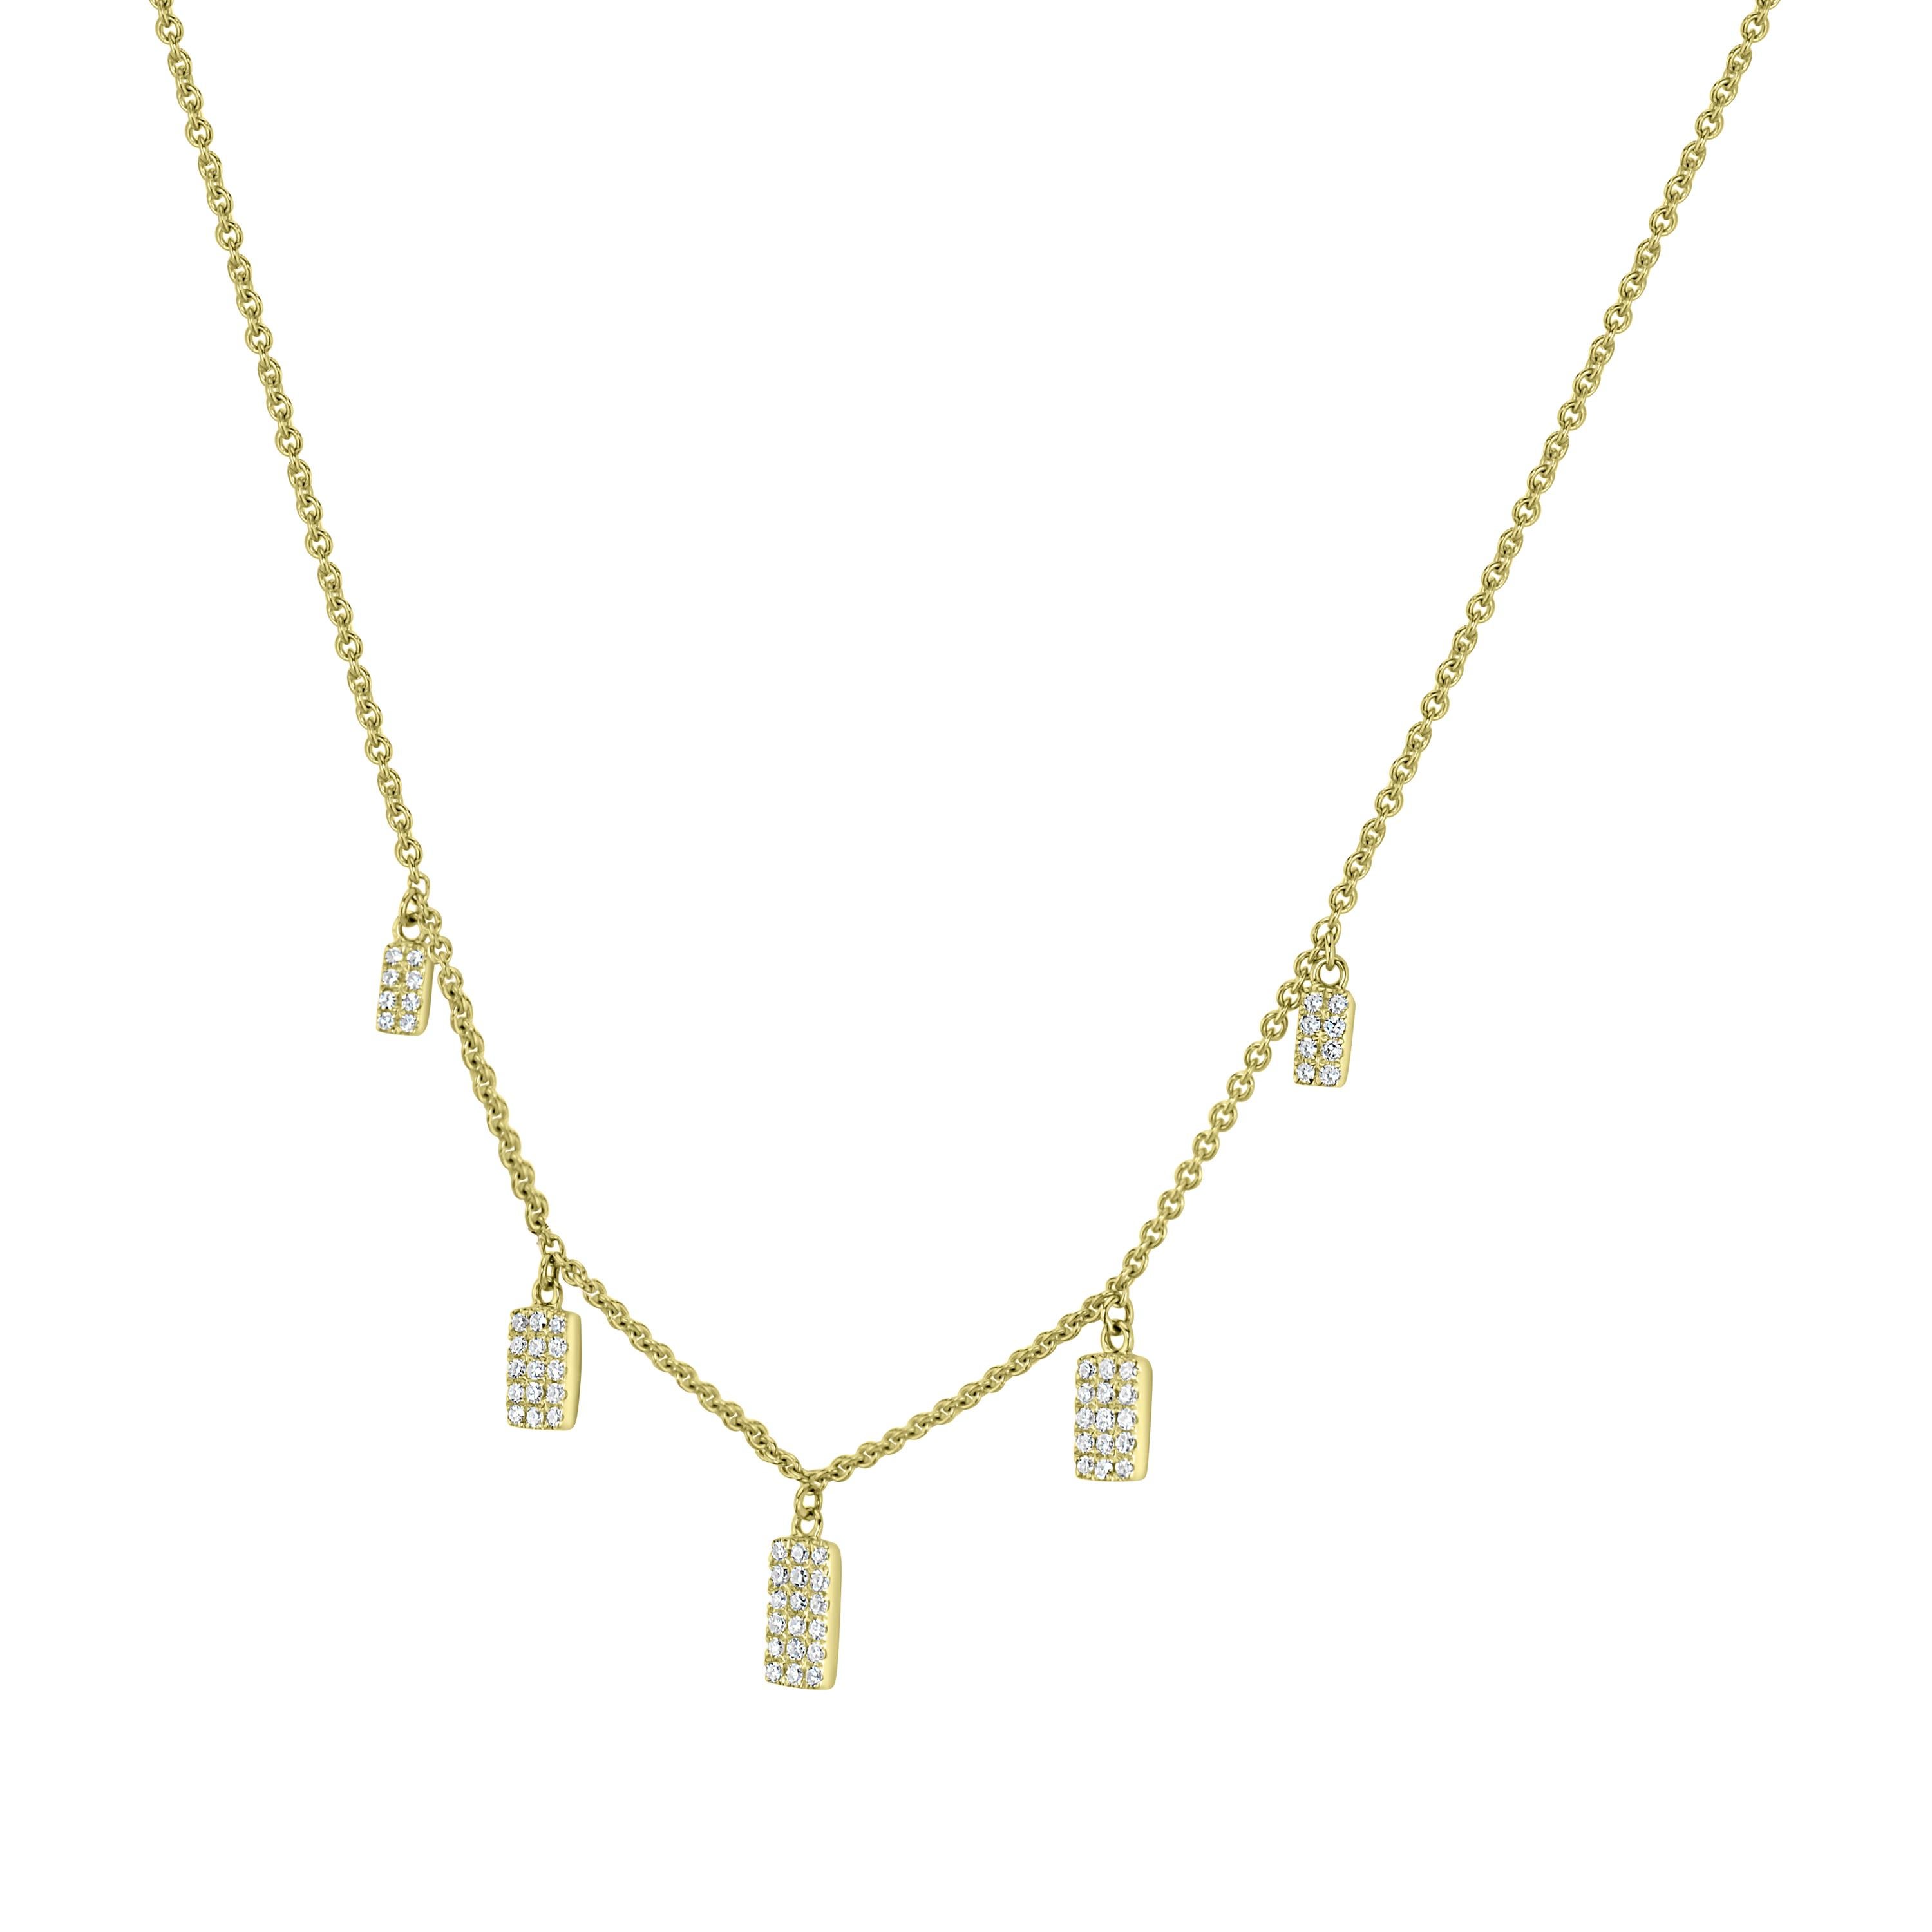 We got you the perfect accessory to go with every outfit! Presenting a necklace with glittering charms of round diamonds draping an elegant cable chain of 14K yellow gold by Luxle.

Please follow the Luxury Jewels storefront to view the latest